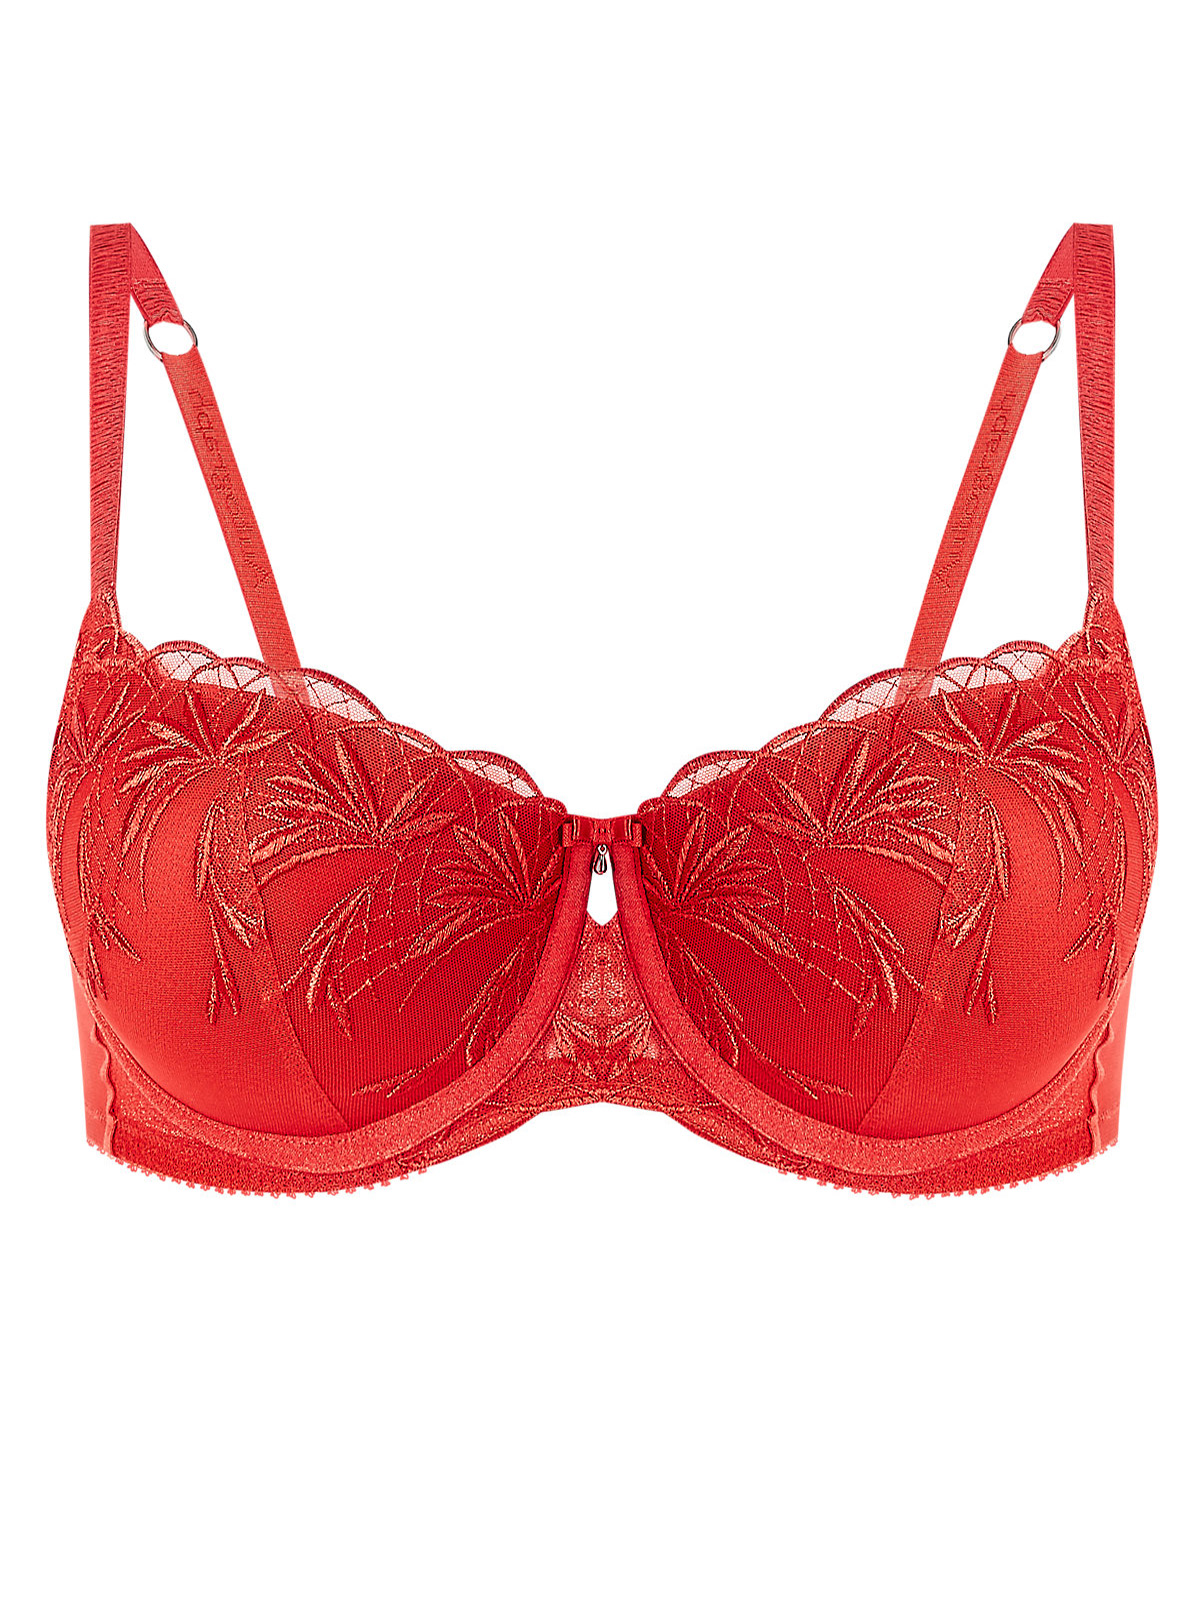 Marks and Spencer - - M&5 ASSORTED Padded Bras - Size 30 to 40 (C-D-DD-E)